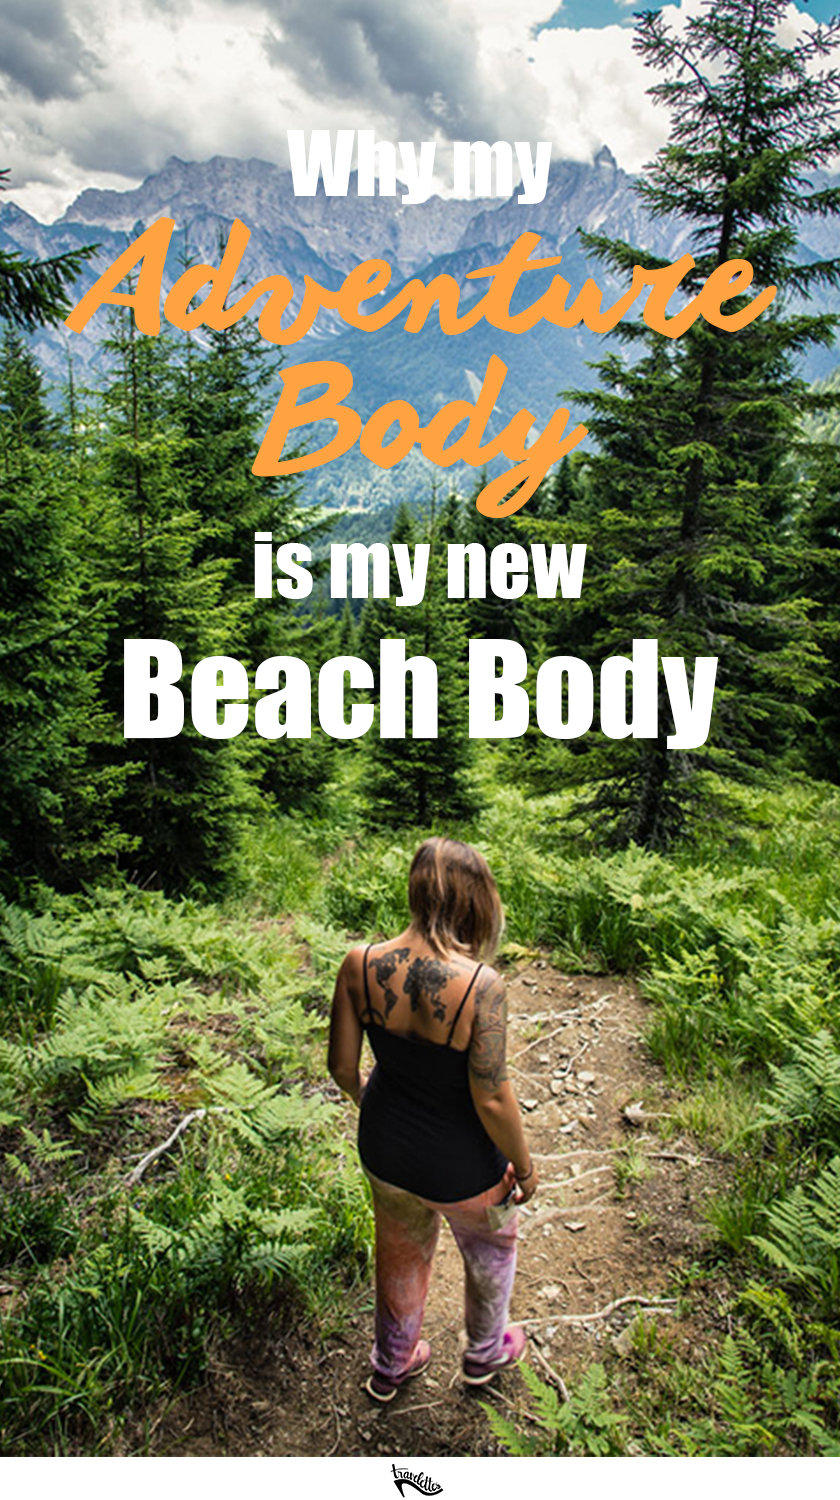 A bikini body is just any body with a bikini on it - here's why you should aim for an adventure body instead!